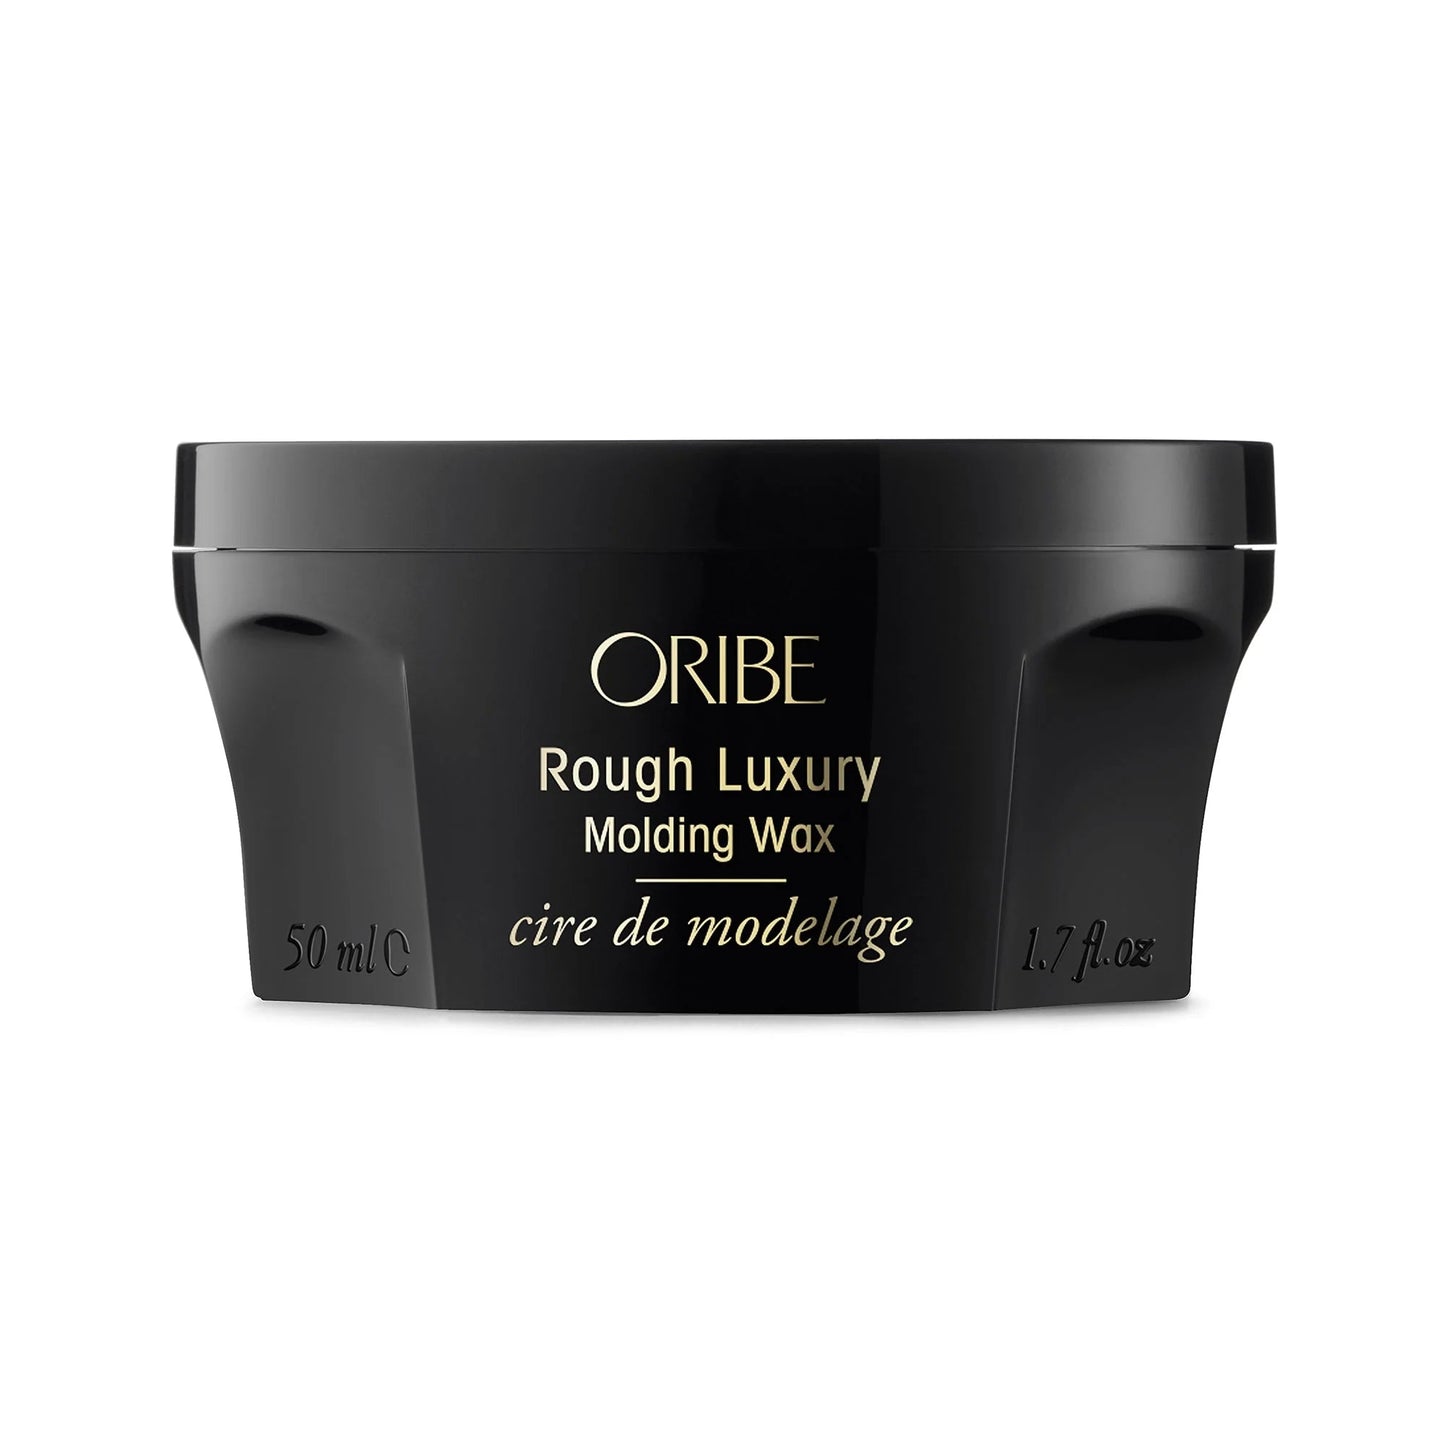 Oribe Rough Luxury Molding Wax - shelley and co